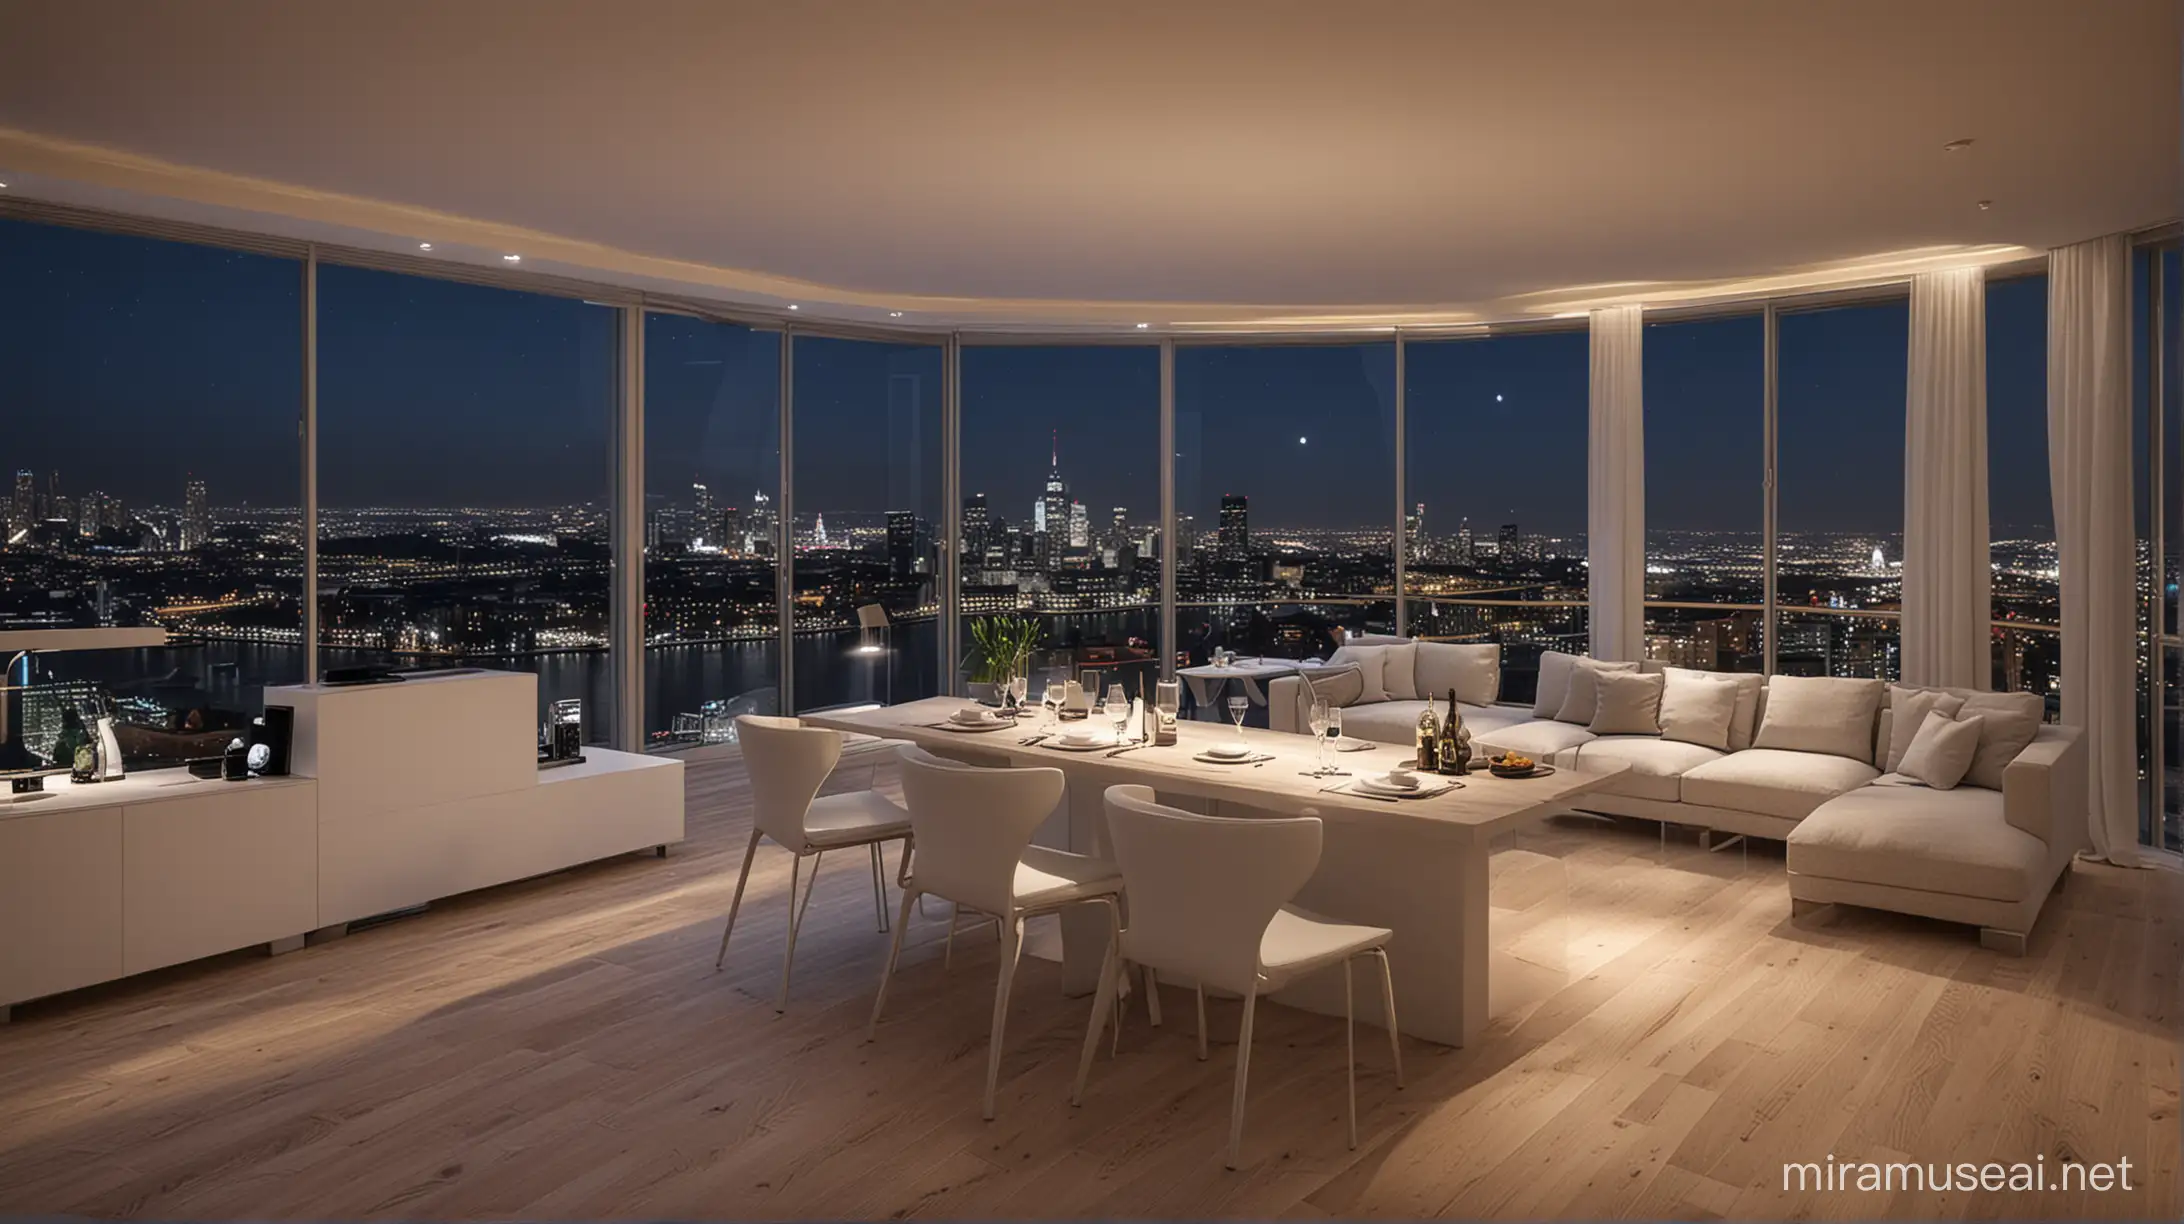 Luxurious Penthouse Apartment with City Skyline View at Night